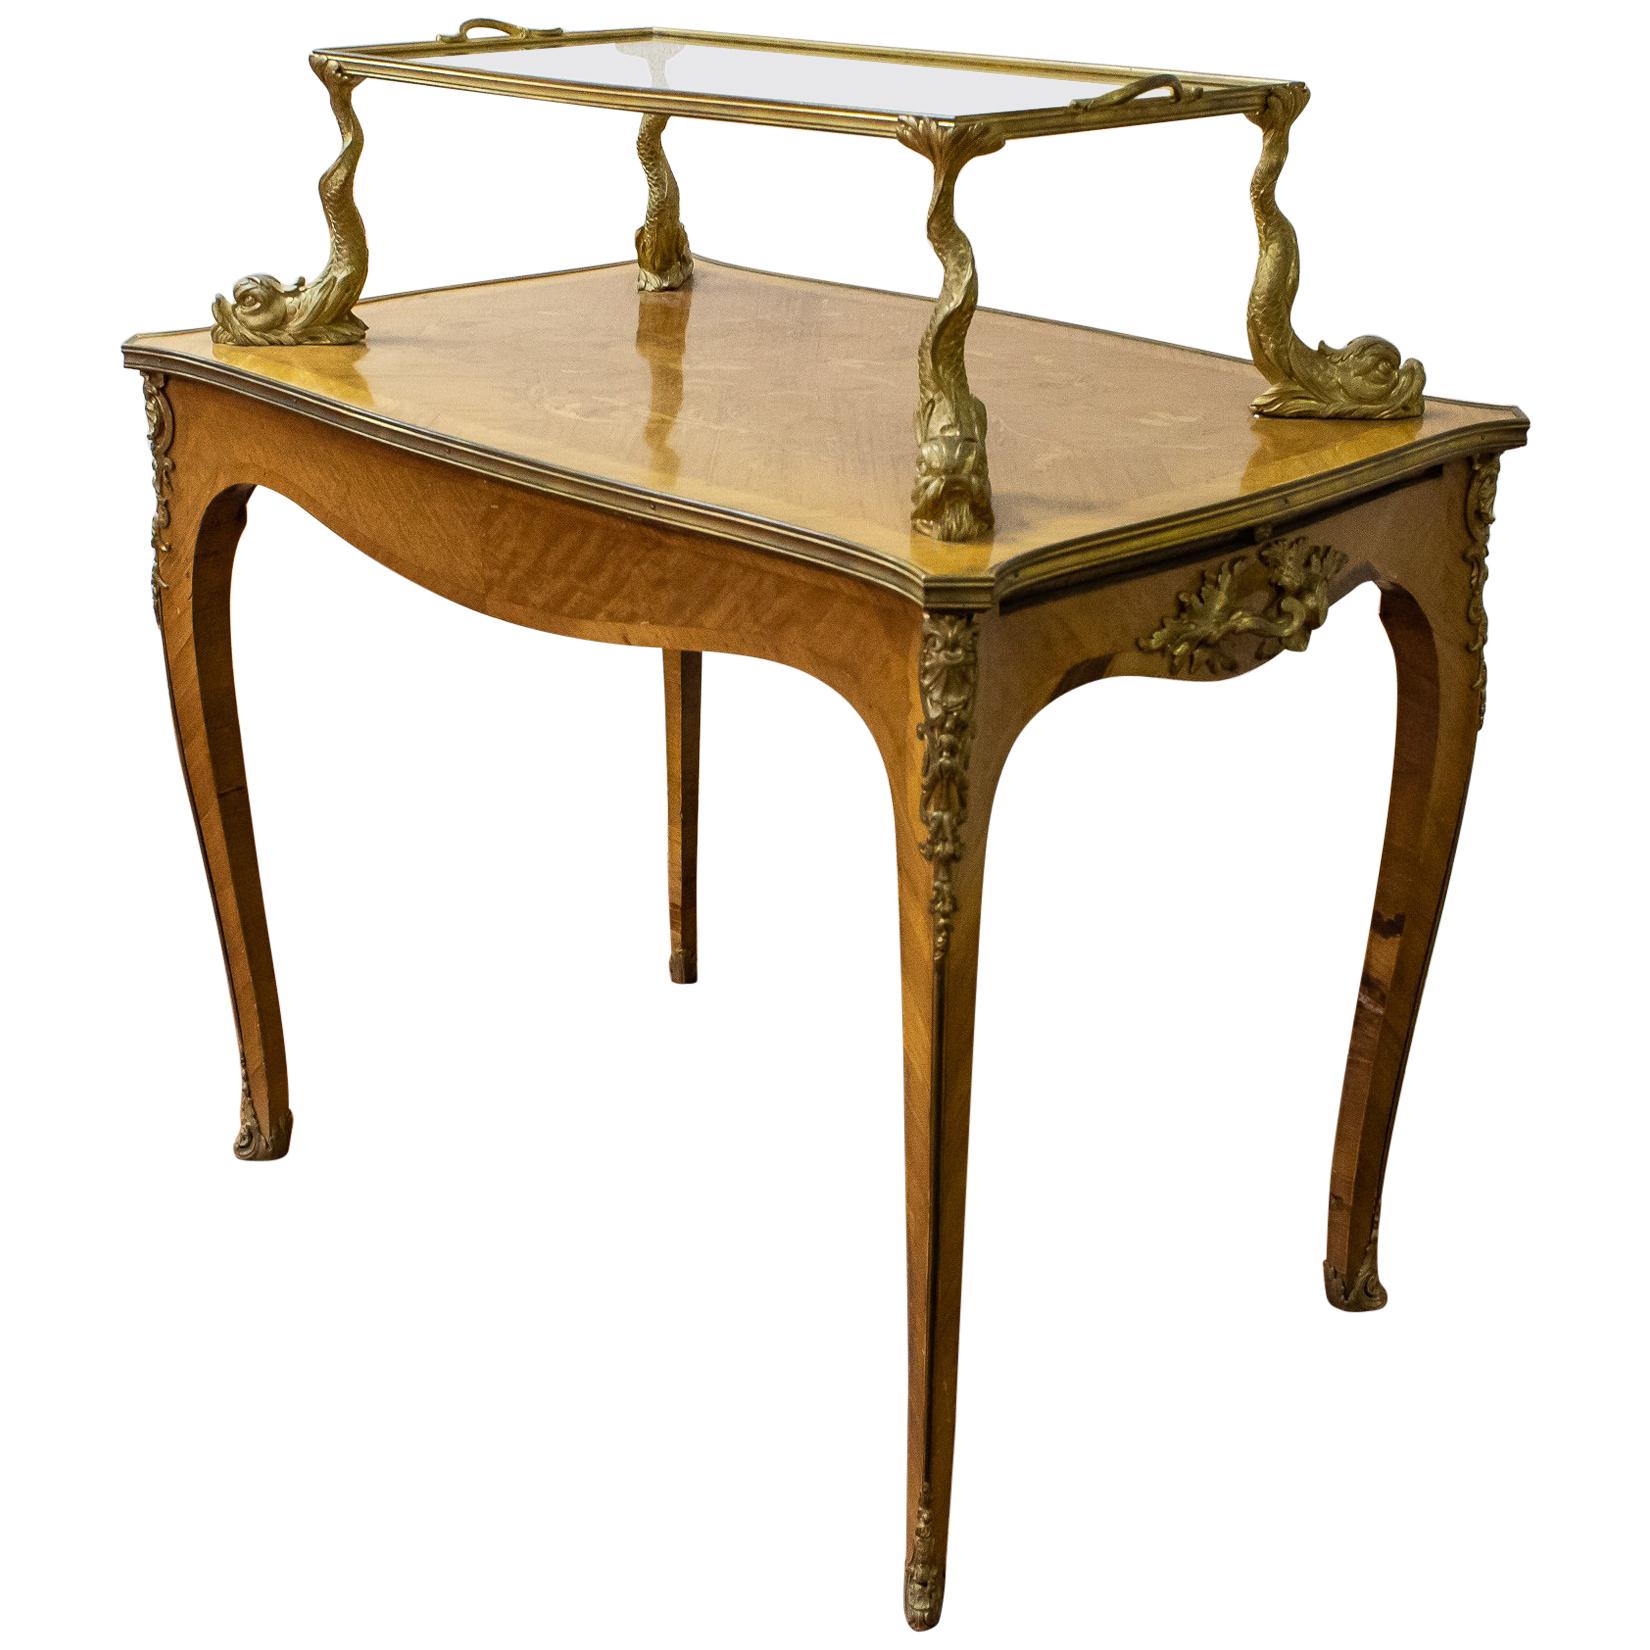 Louis XV Style Gilt Bronze Mounted King Wood Two-Tier Table